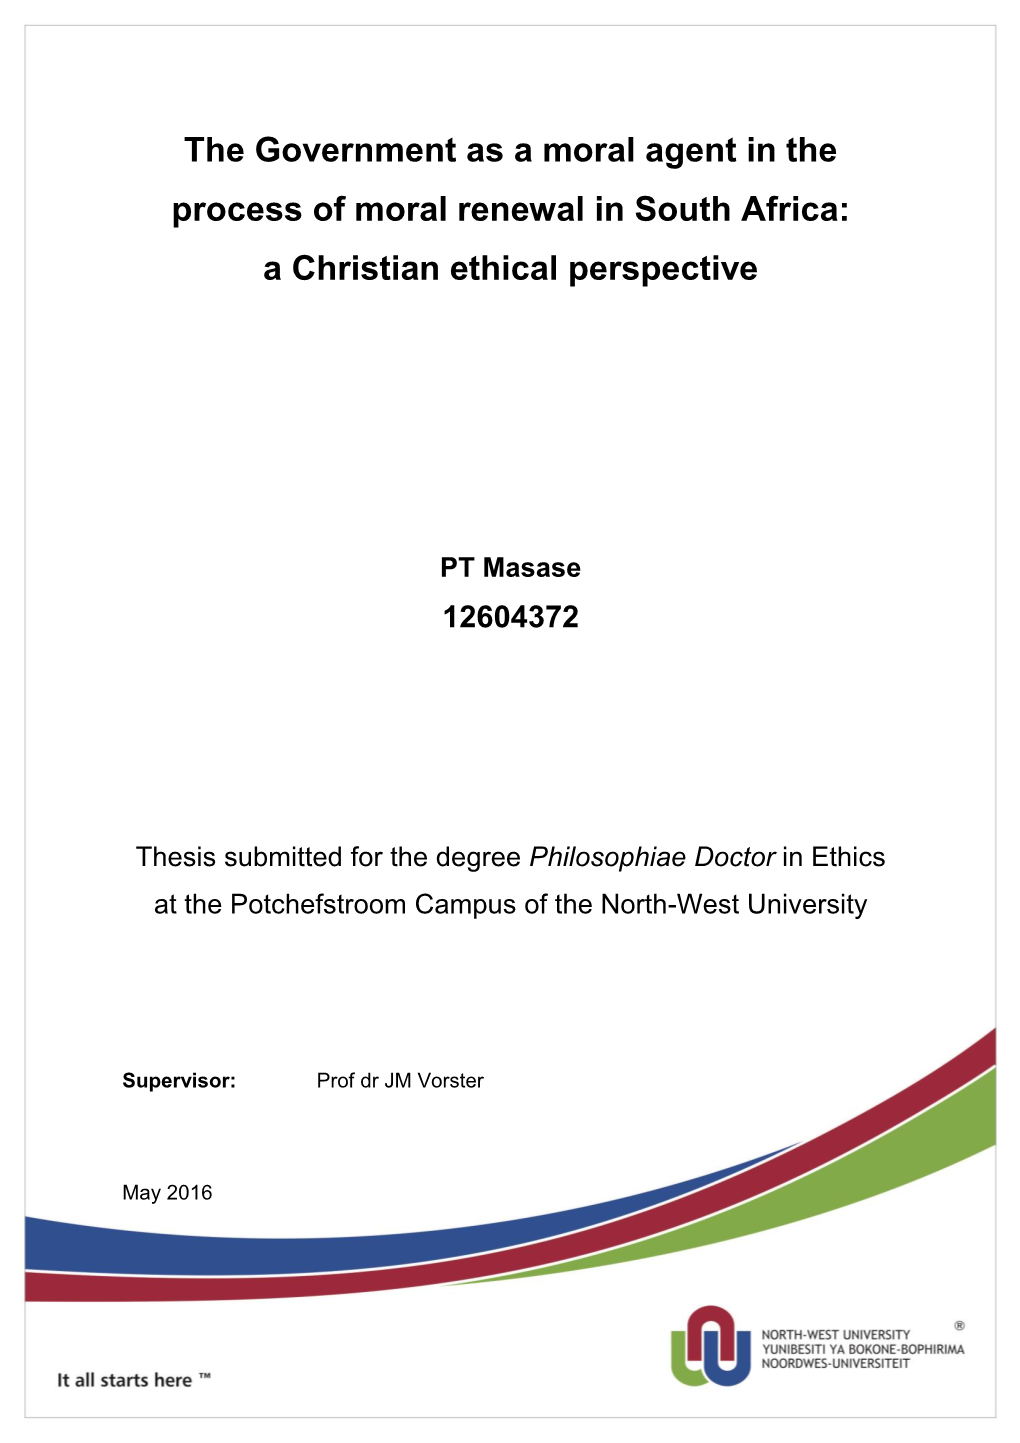 The Government As a Moral Agent in the Process of Moral Renewal in South Africa: a Christian Ethical Perspective